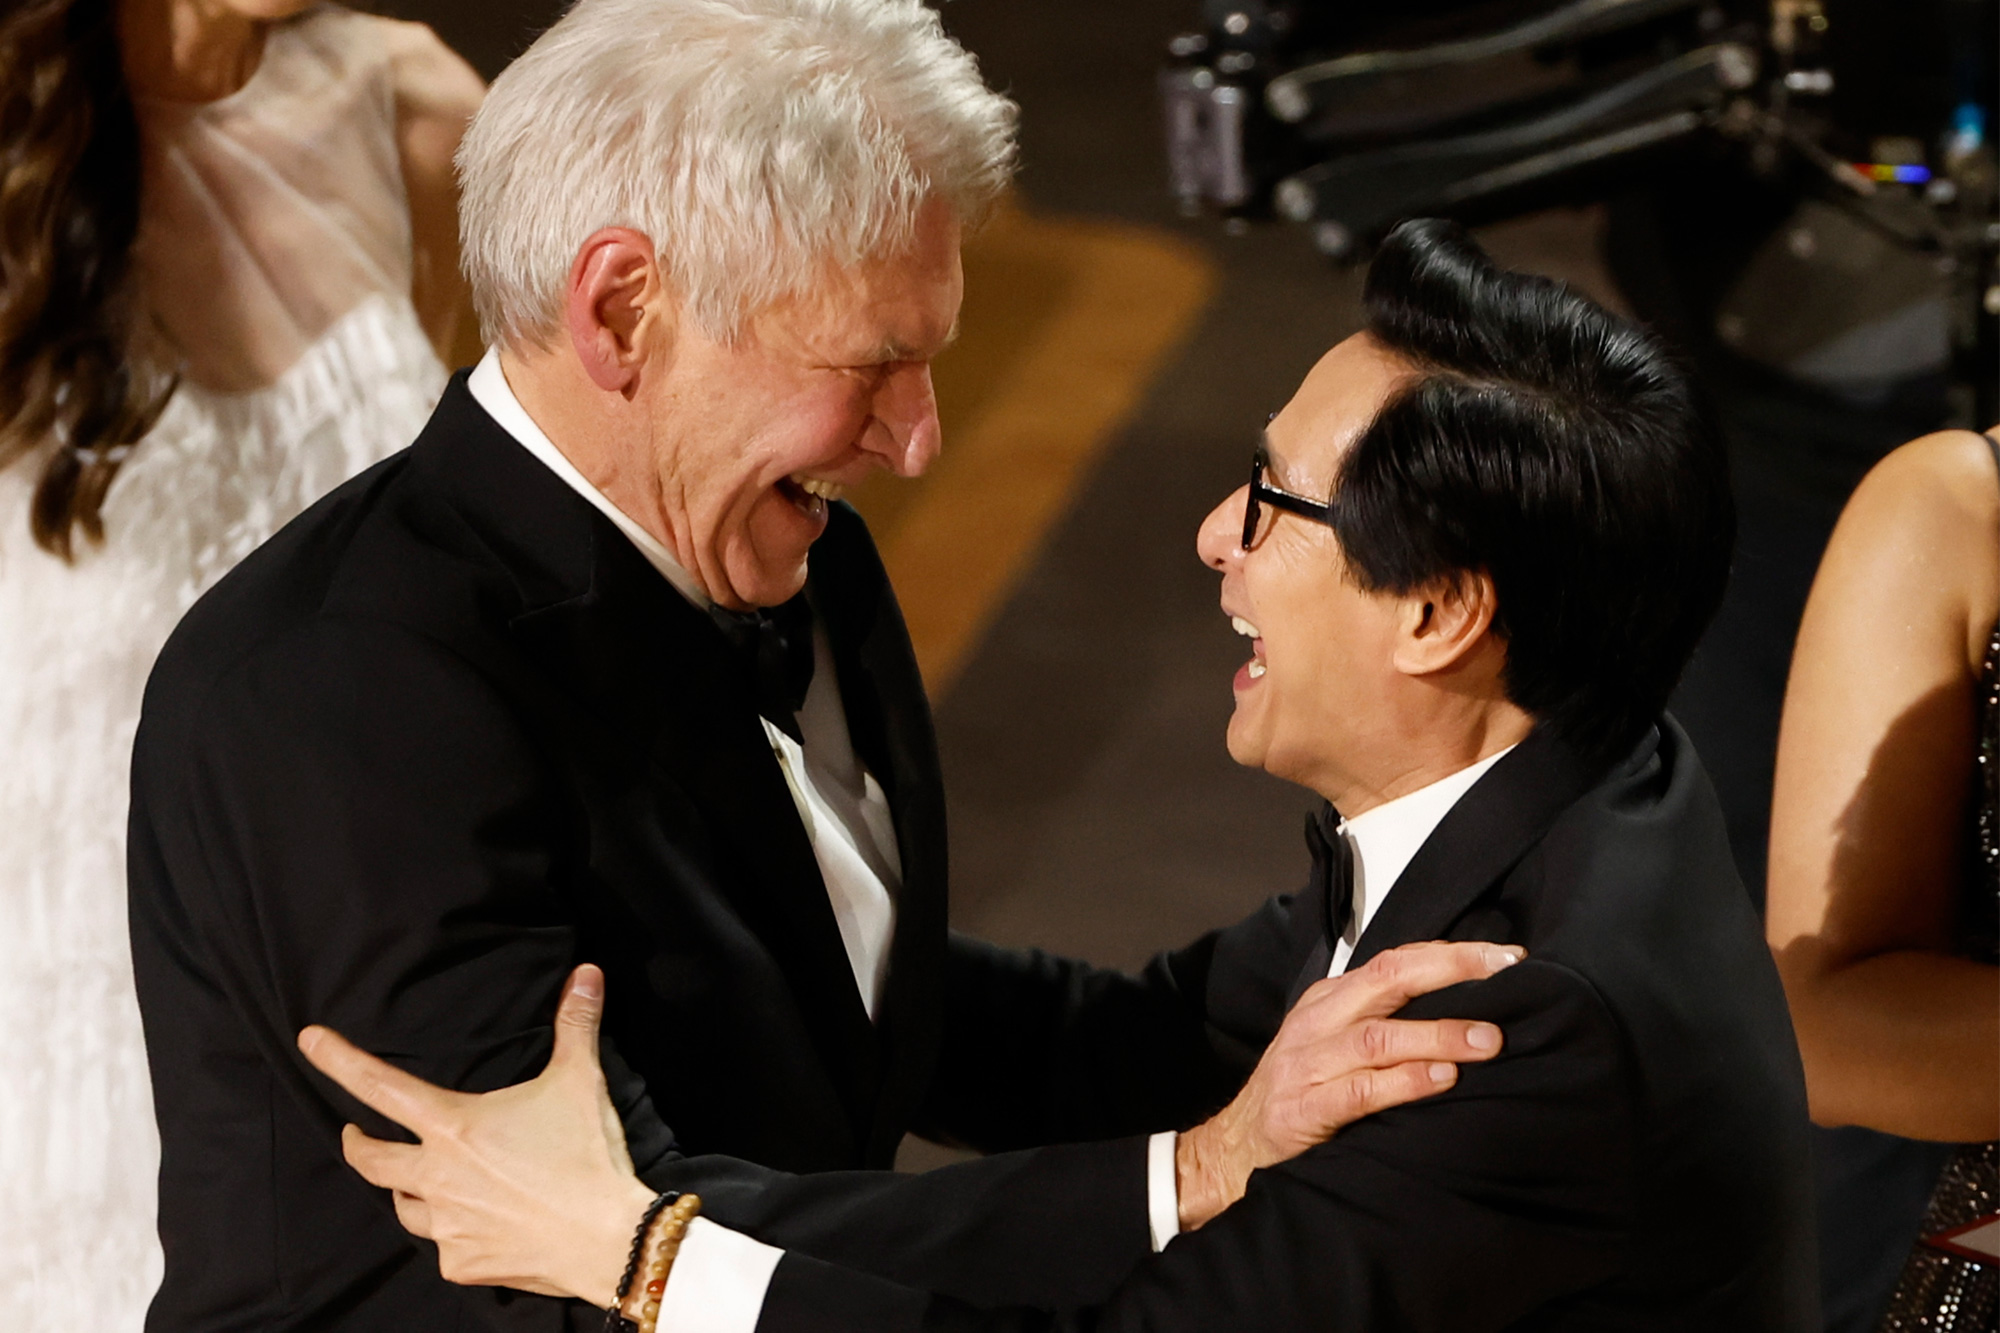 Harrison Ford and Ke Huy Quan at the 2023 Oscars